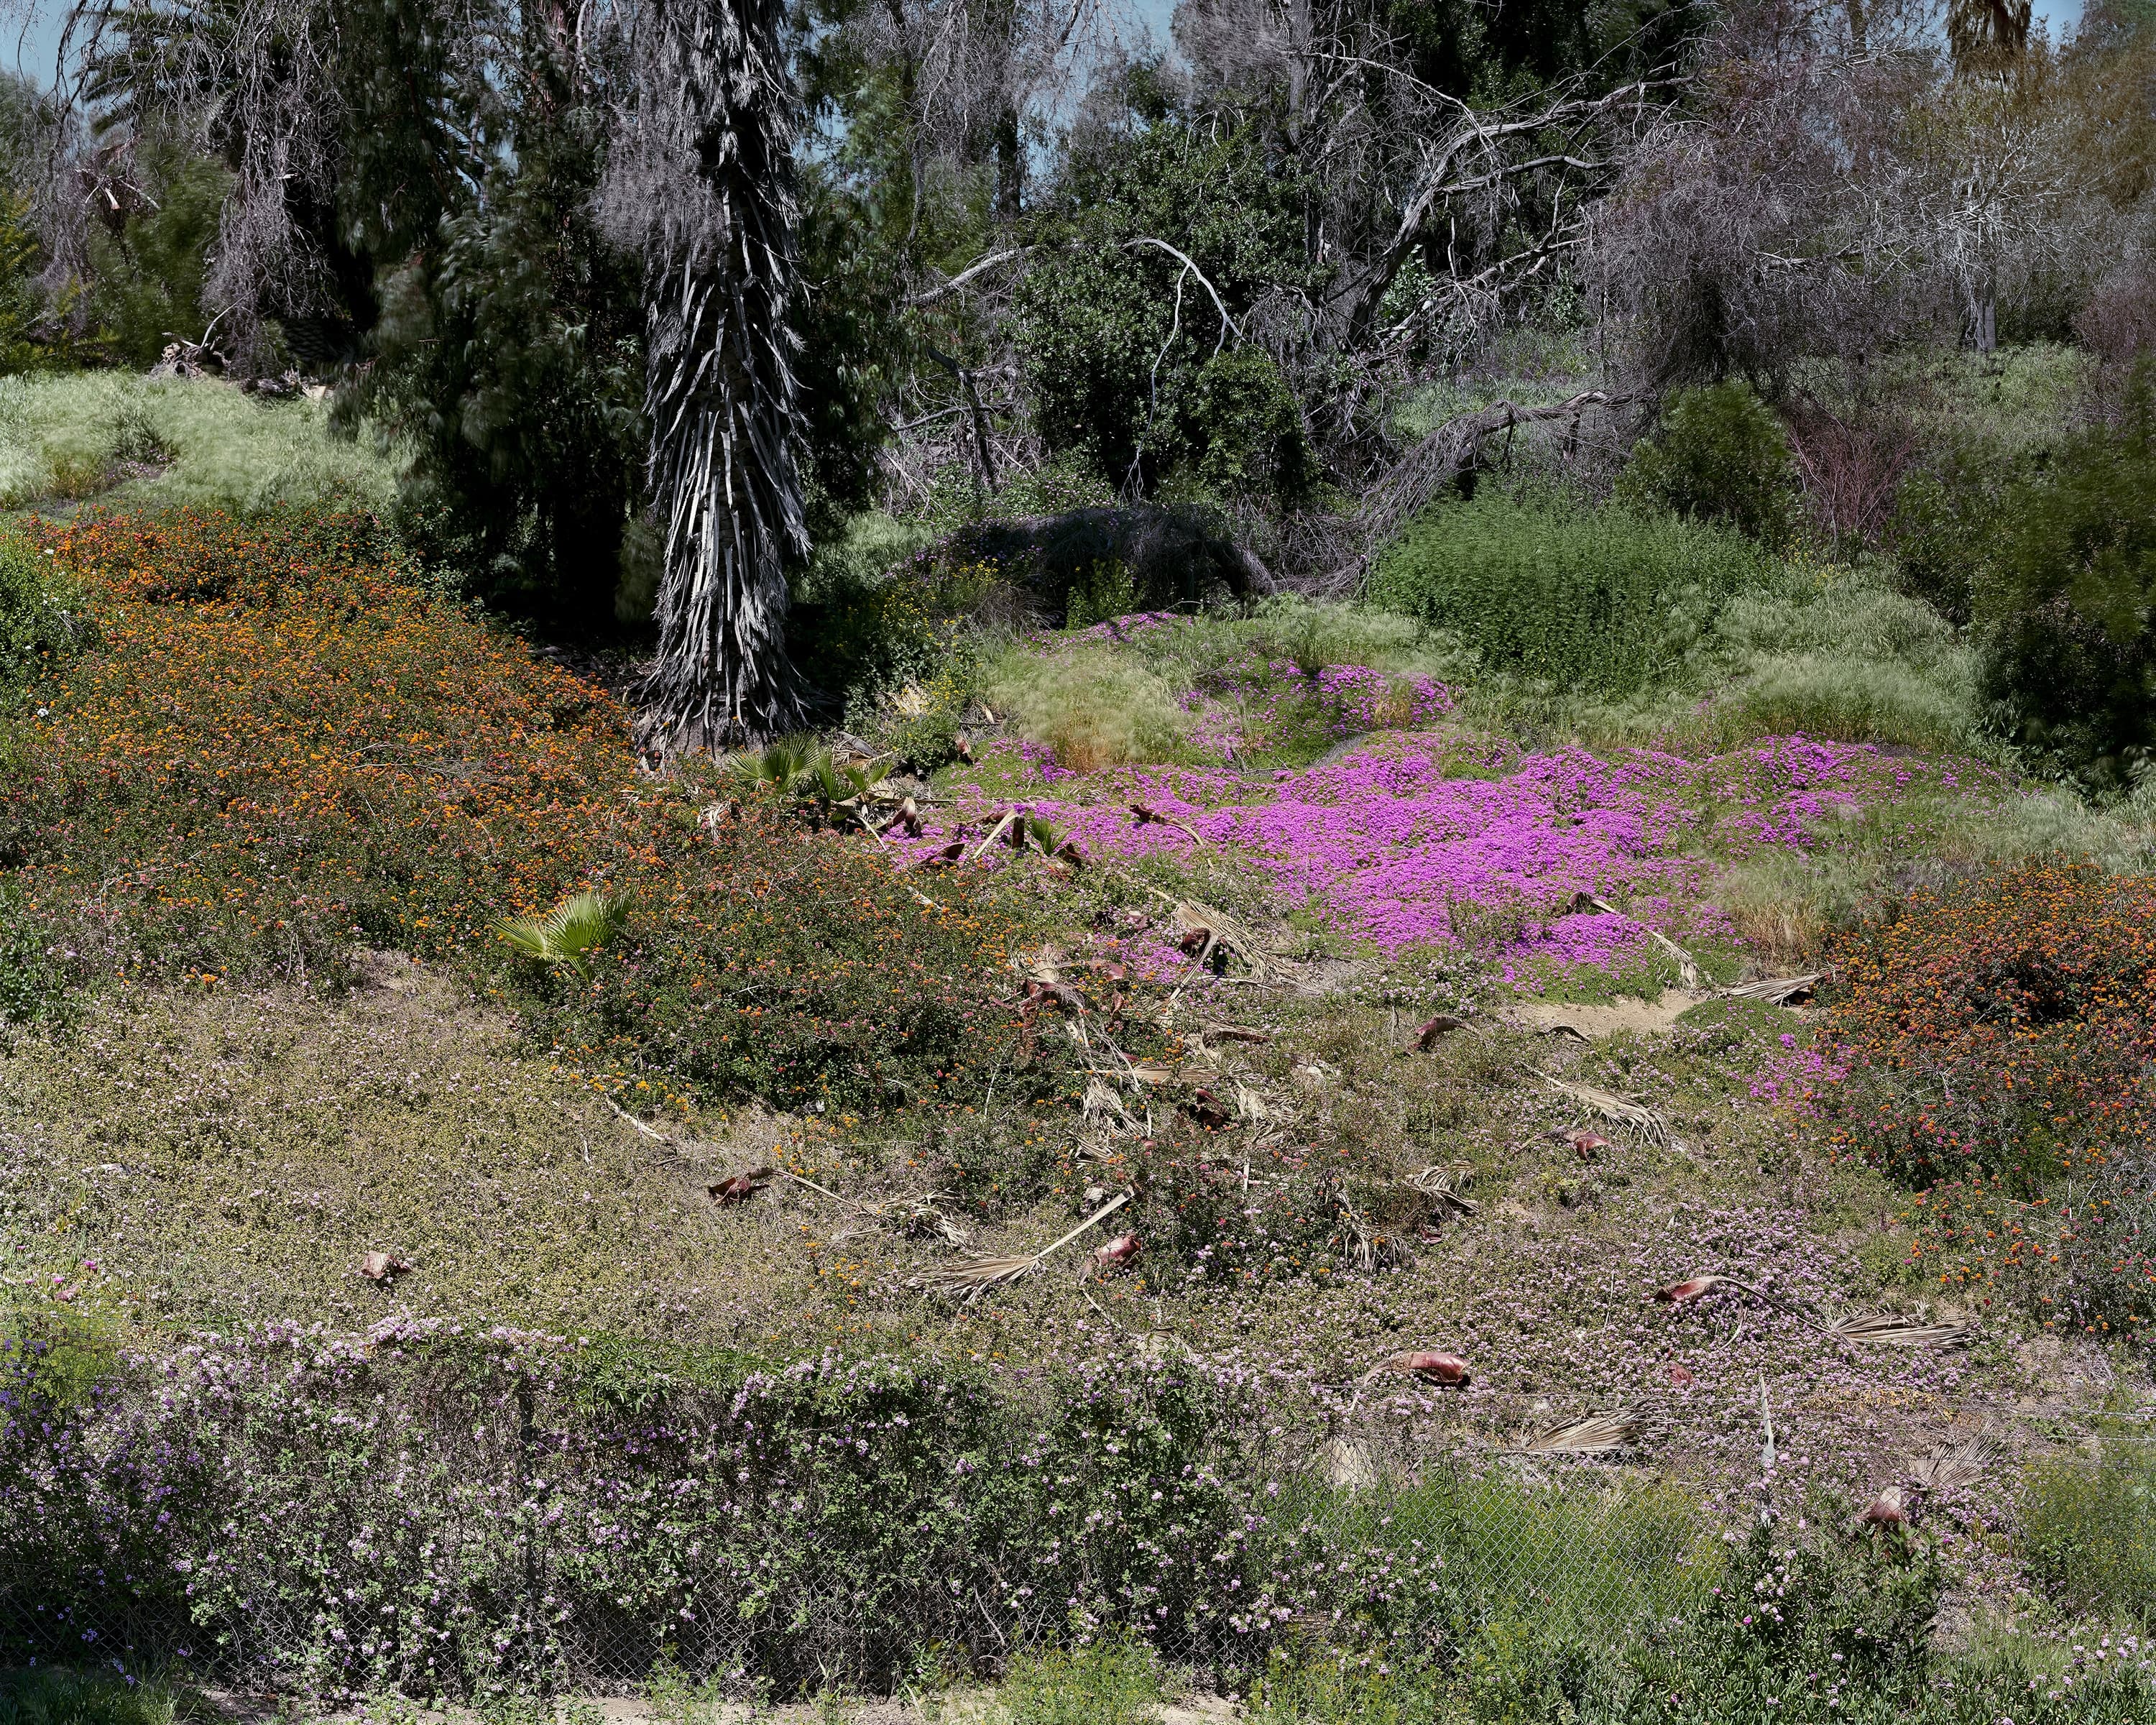 Hill covered with bright pink, yellow, and white wildflowers on the side of a hill off of the 110 freeway in Los Angeles.